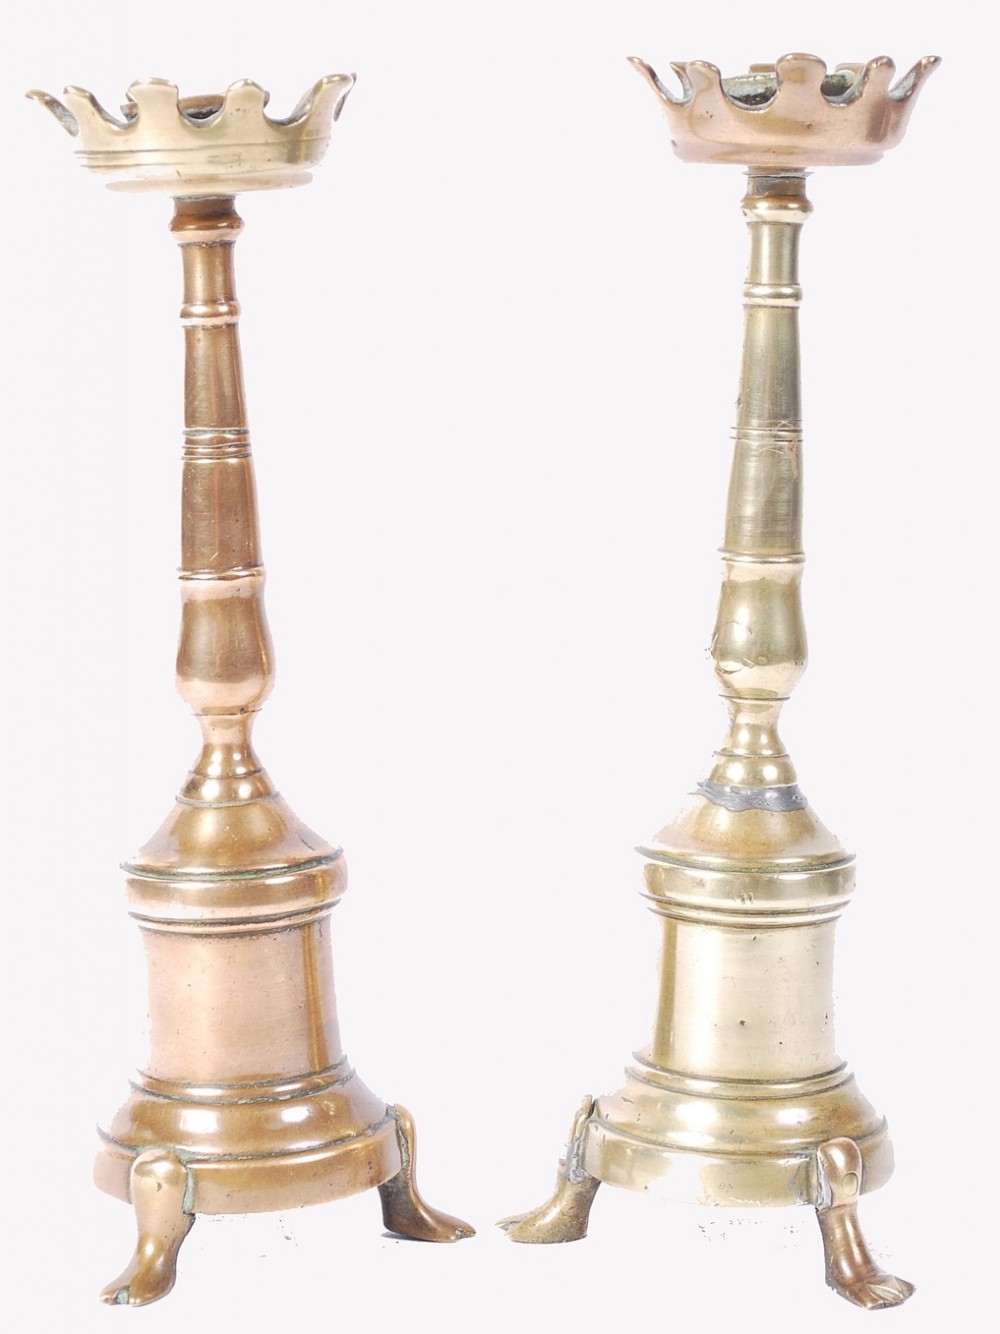 c17th pair of small brass candlesticks